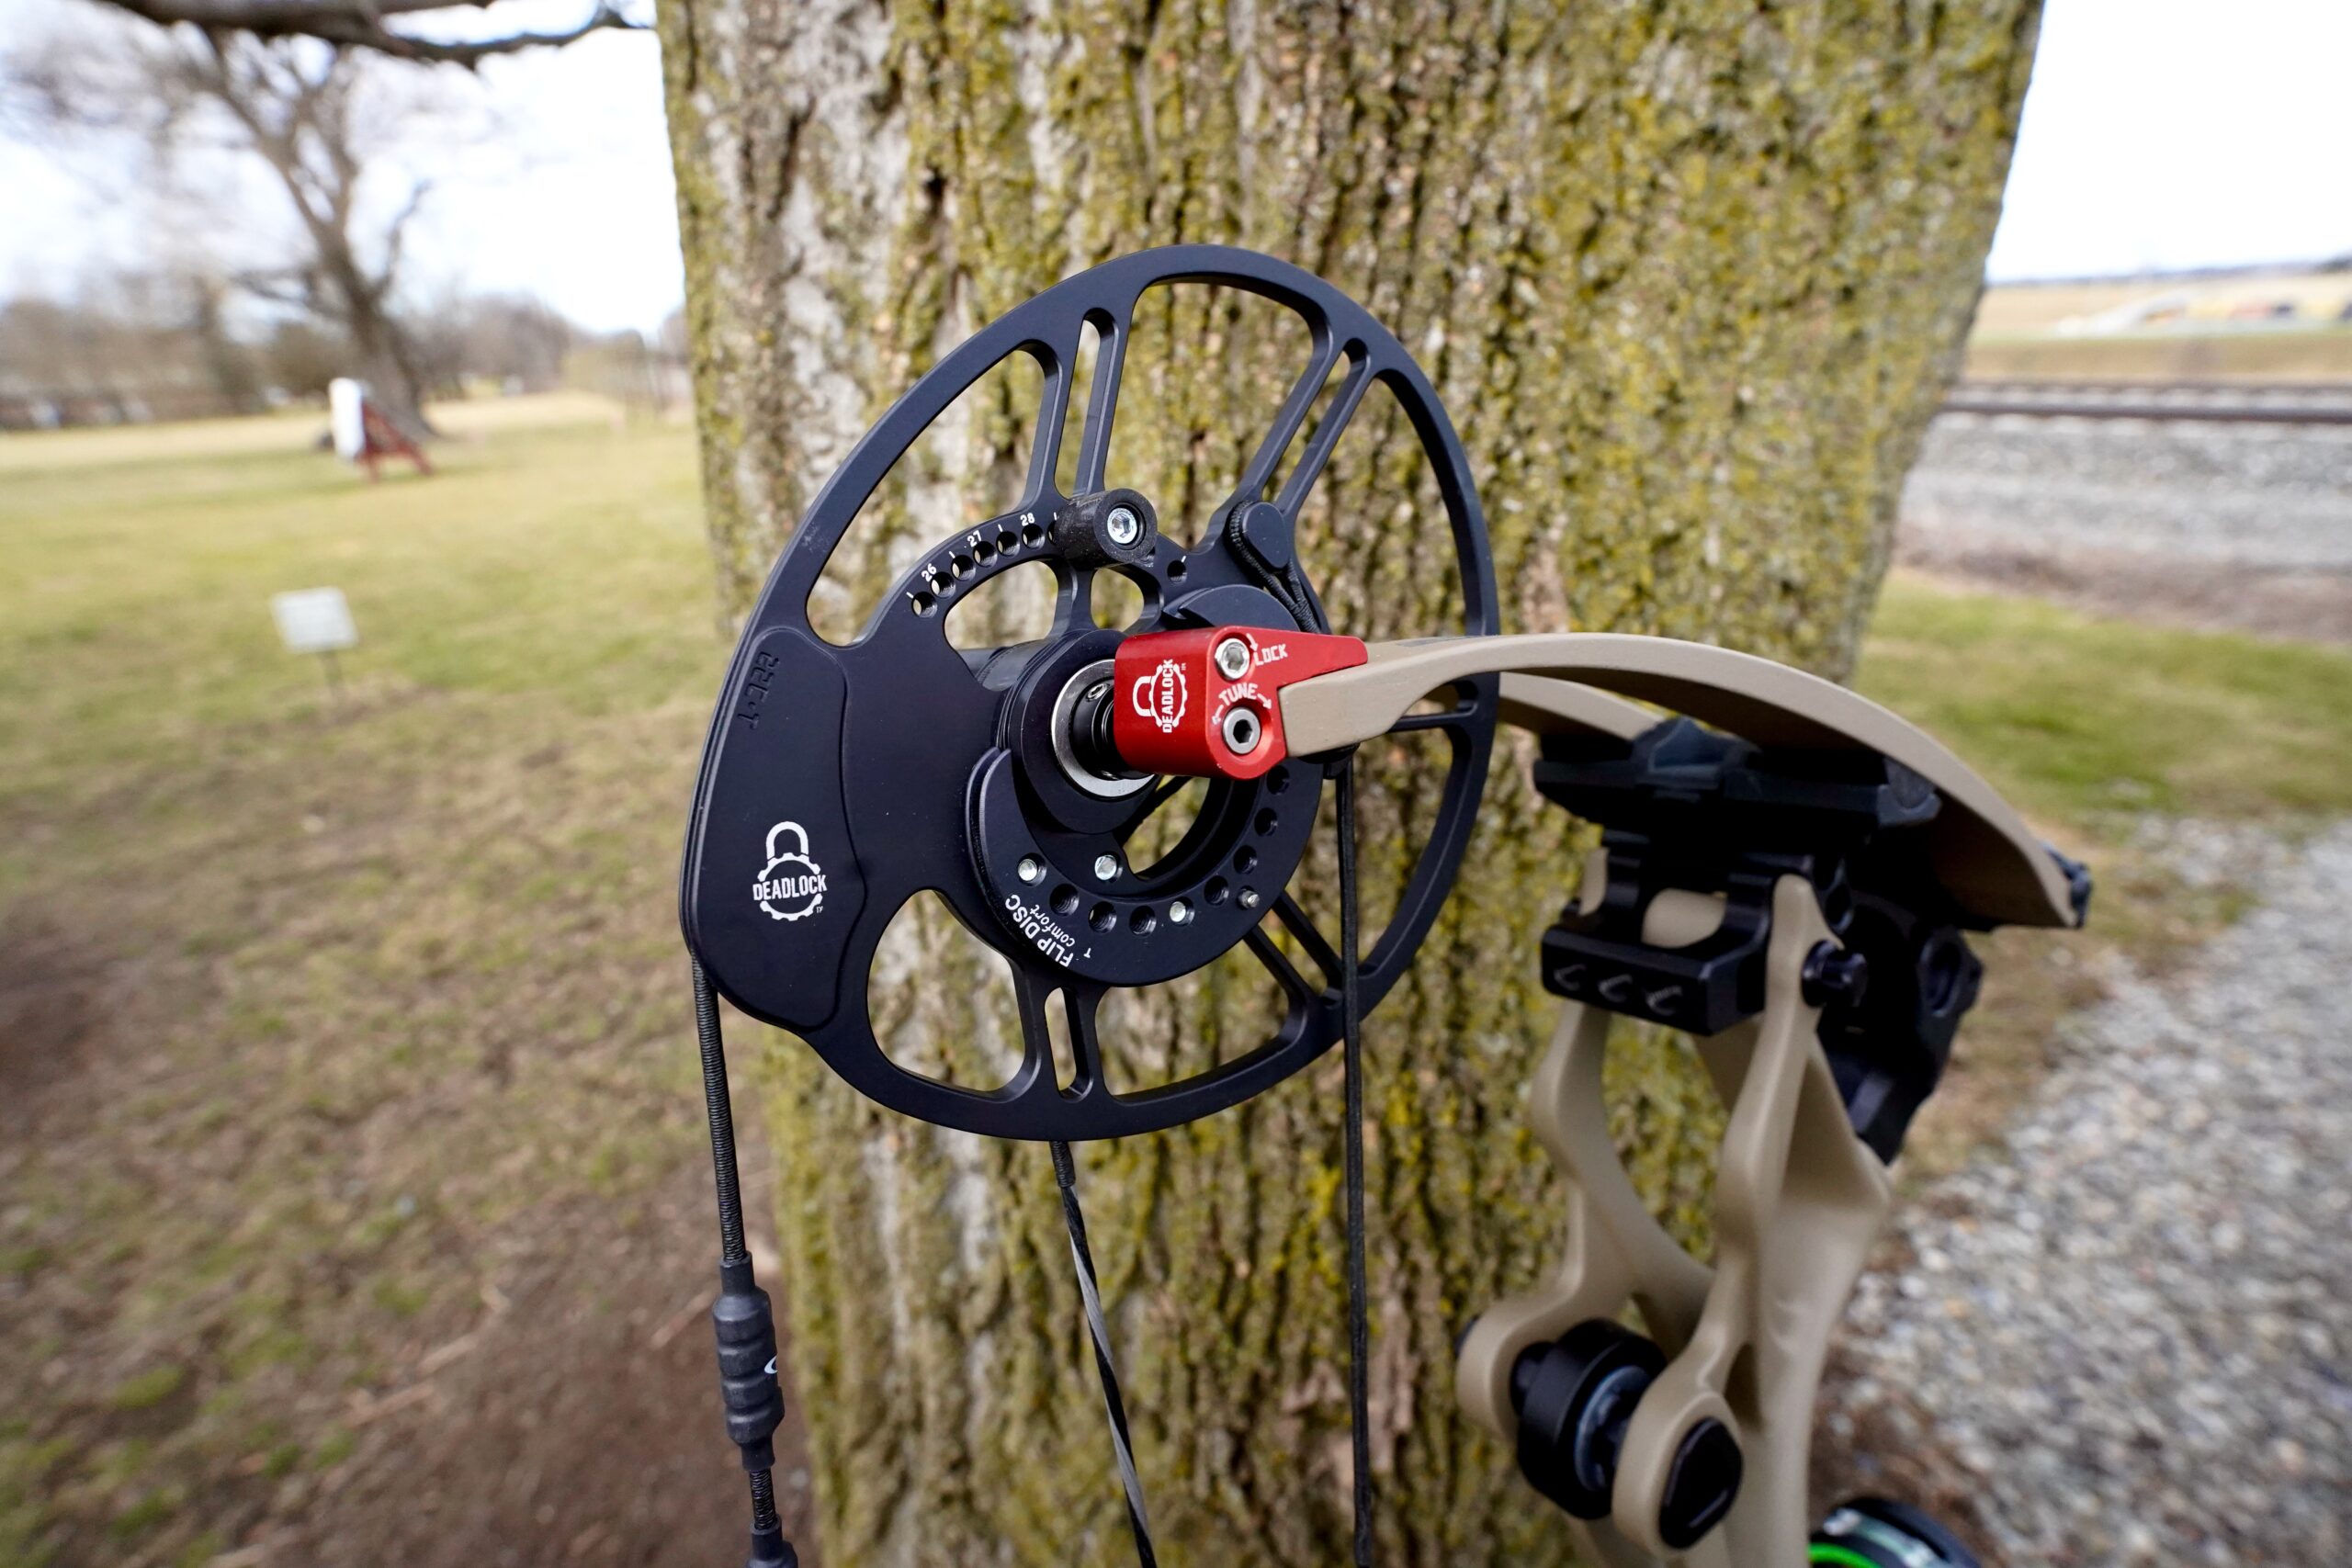 Bowtech's DeadLock system is one of the easiest ways to tune a bow.